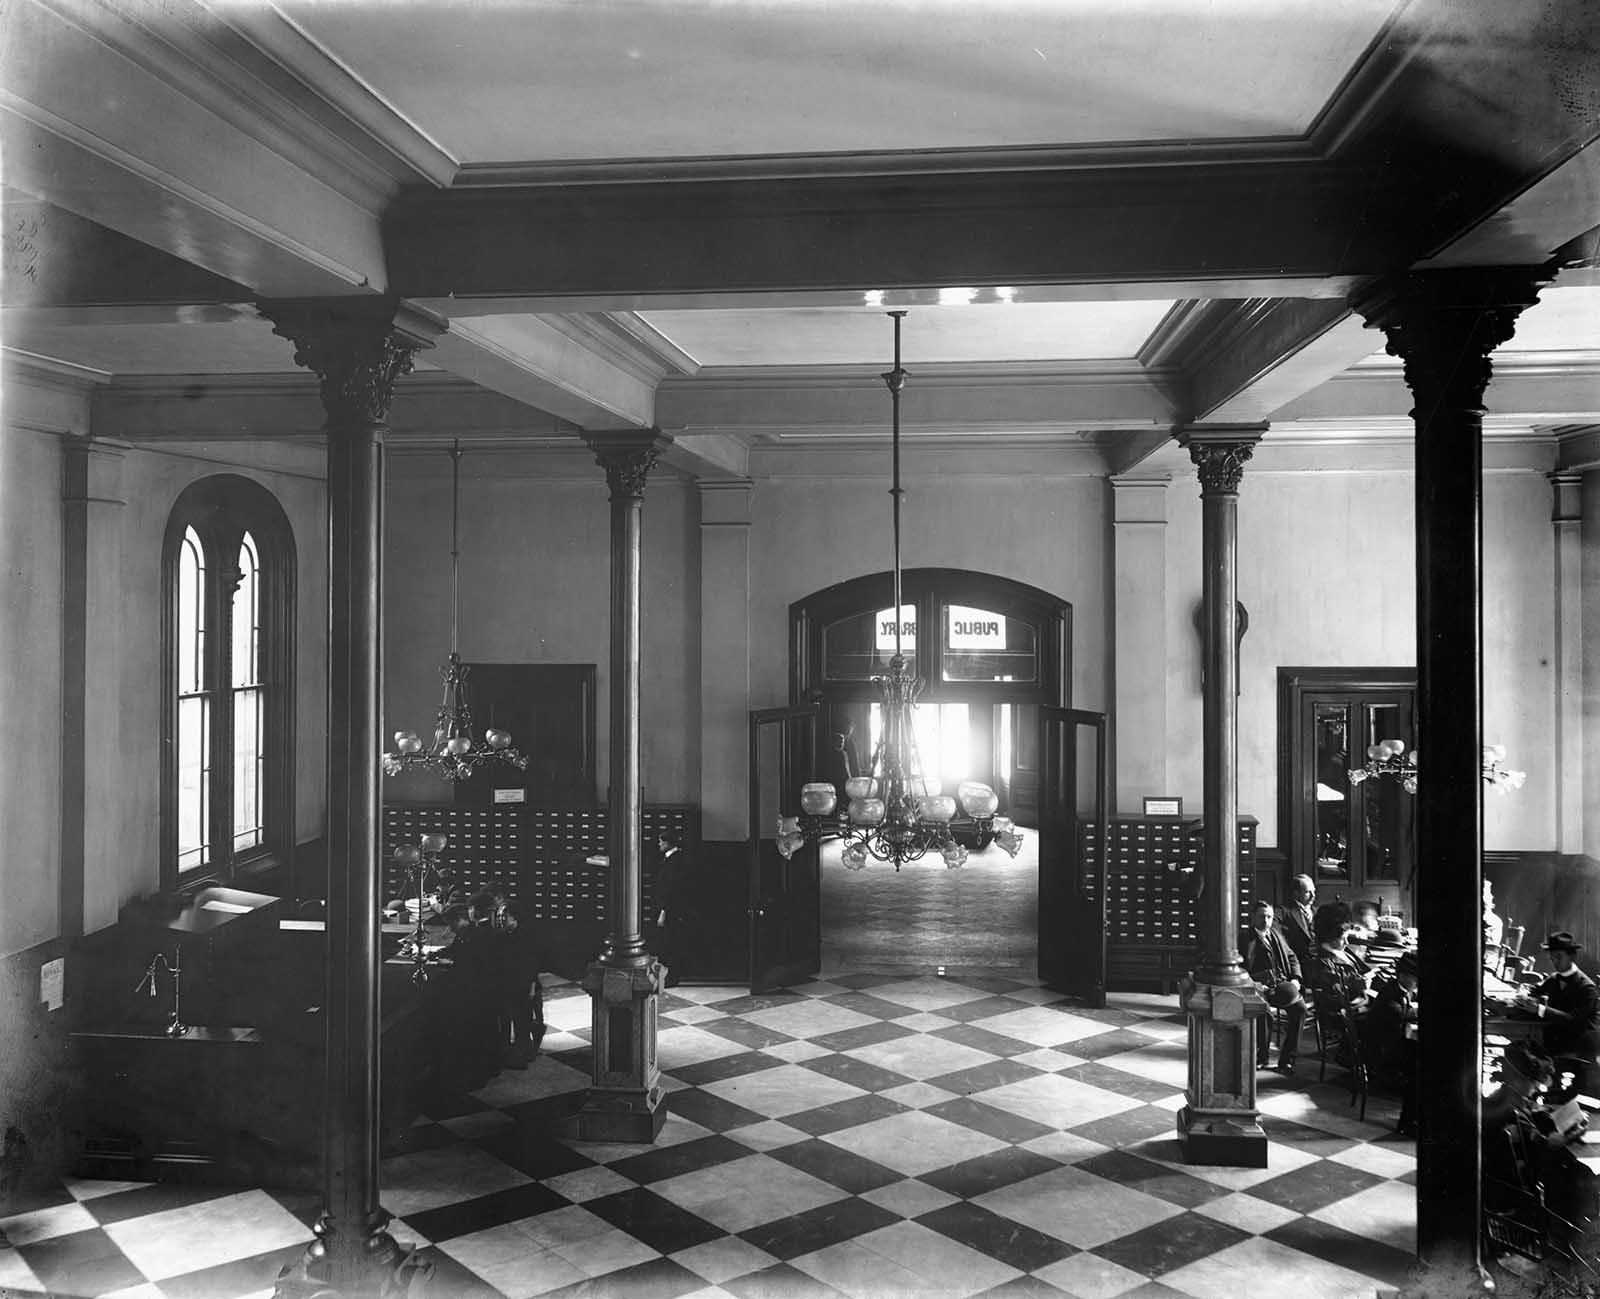 A glimpse of the Main Hall can be seen through vestibule.